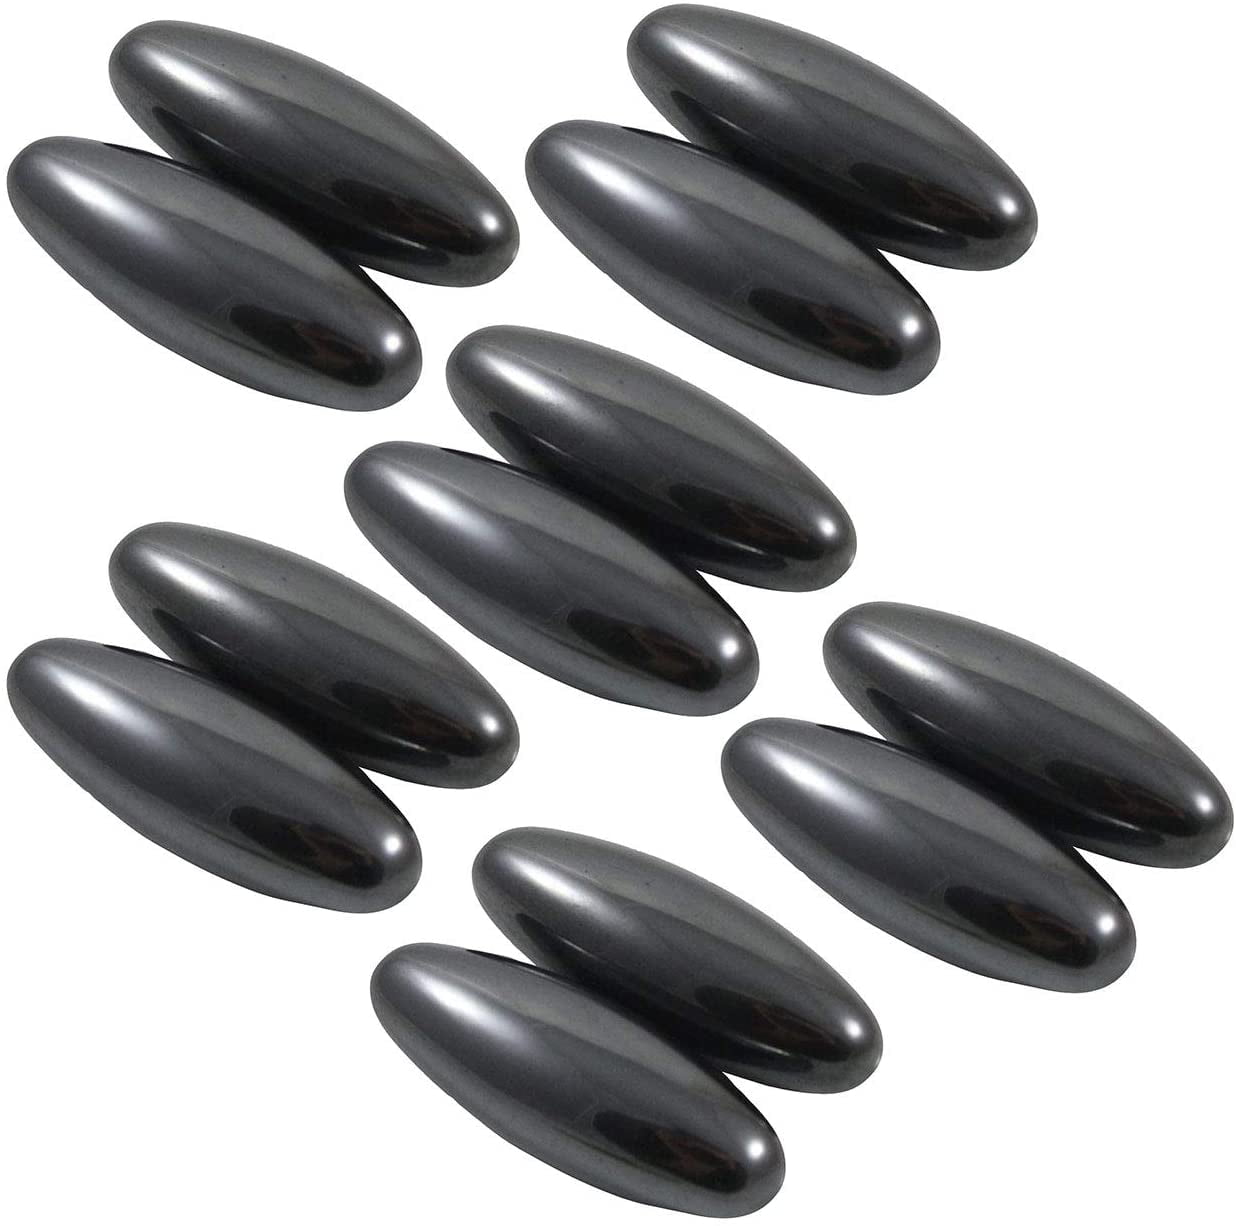 Singing Buzzing Rattlesnake Eggs Child Hematite Magnets Therapy 1.75" SMALL 